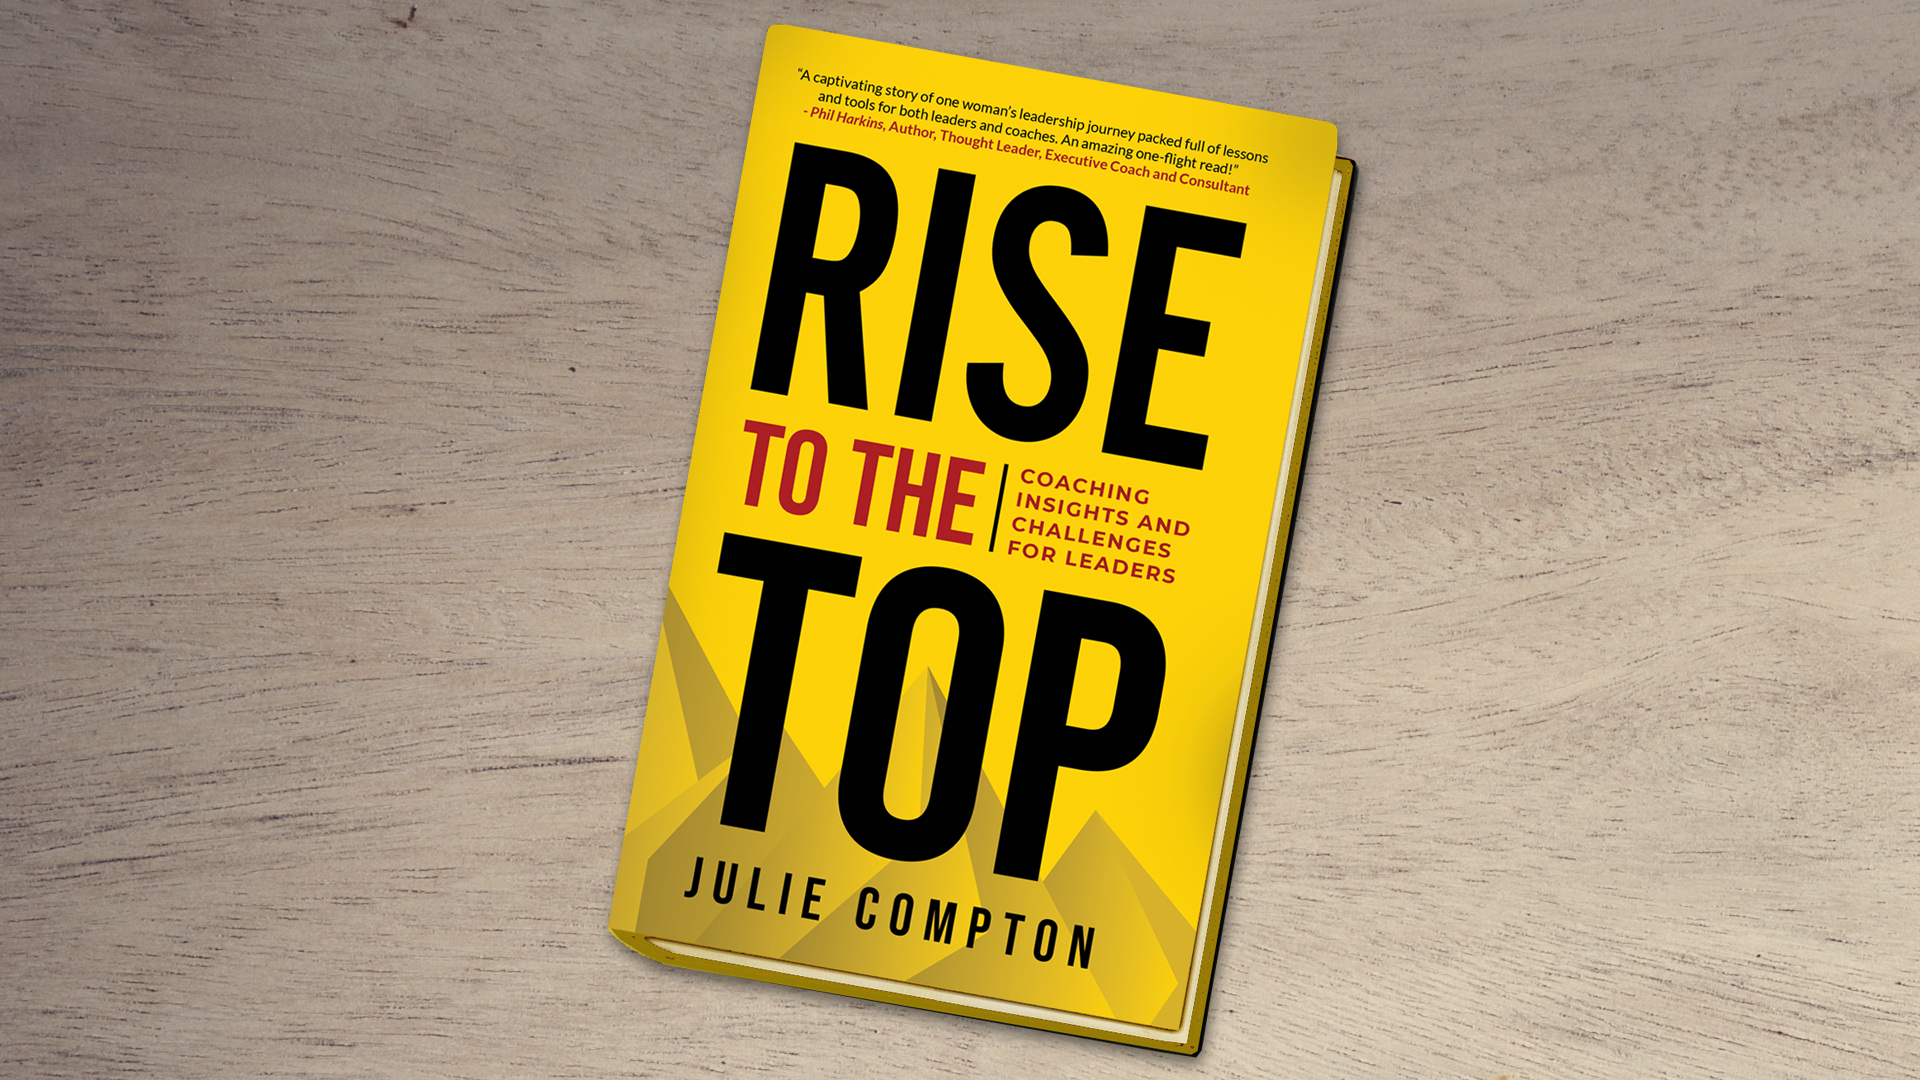 Ready, Set, Rise to the Top: Coaching Insights and Challenges for Leaders  